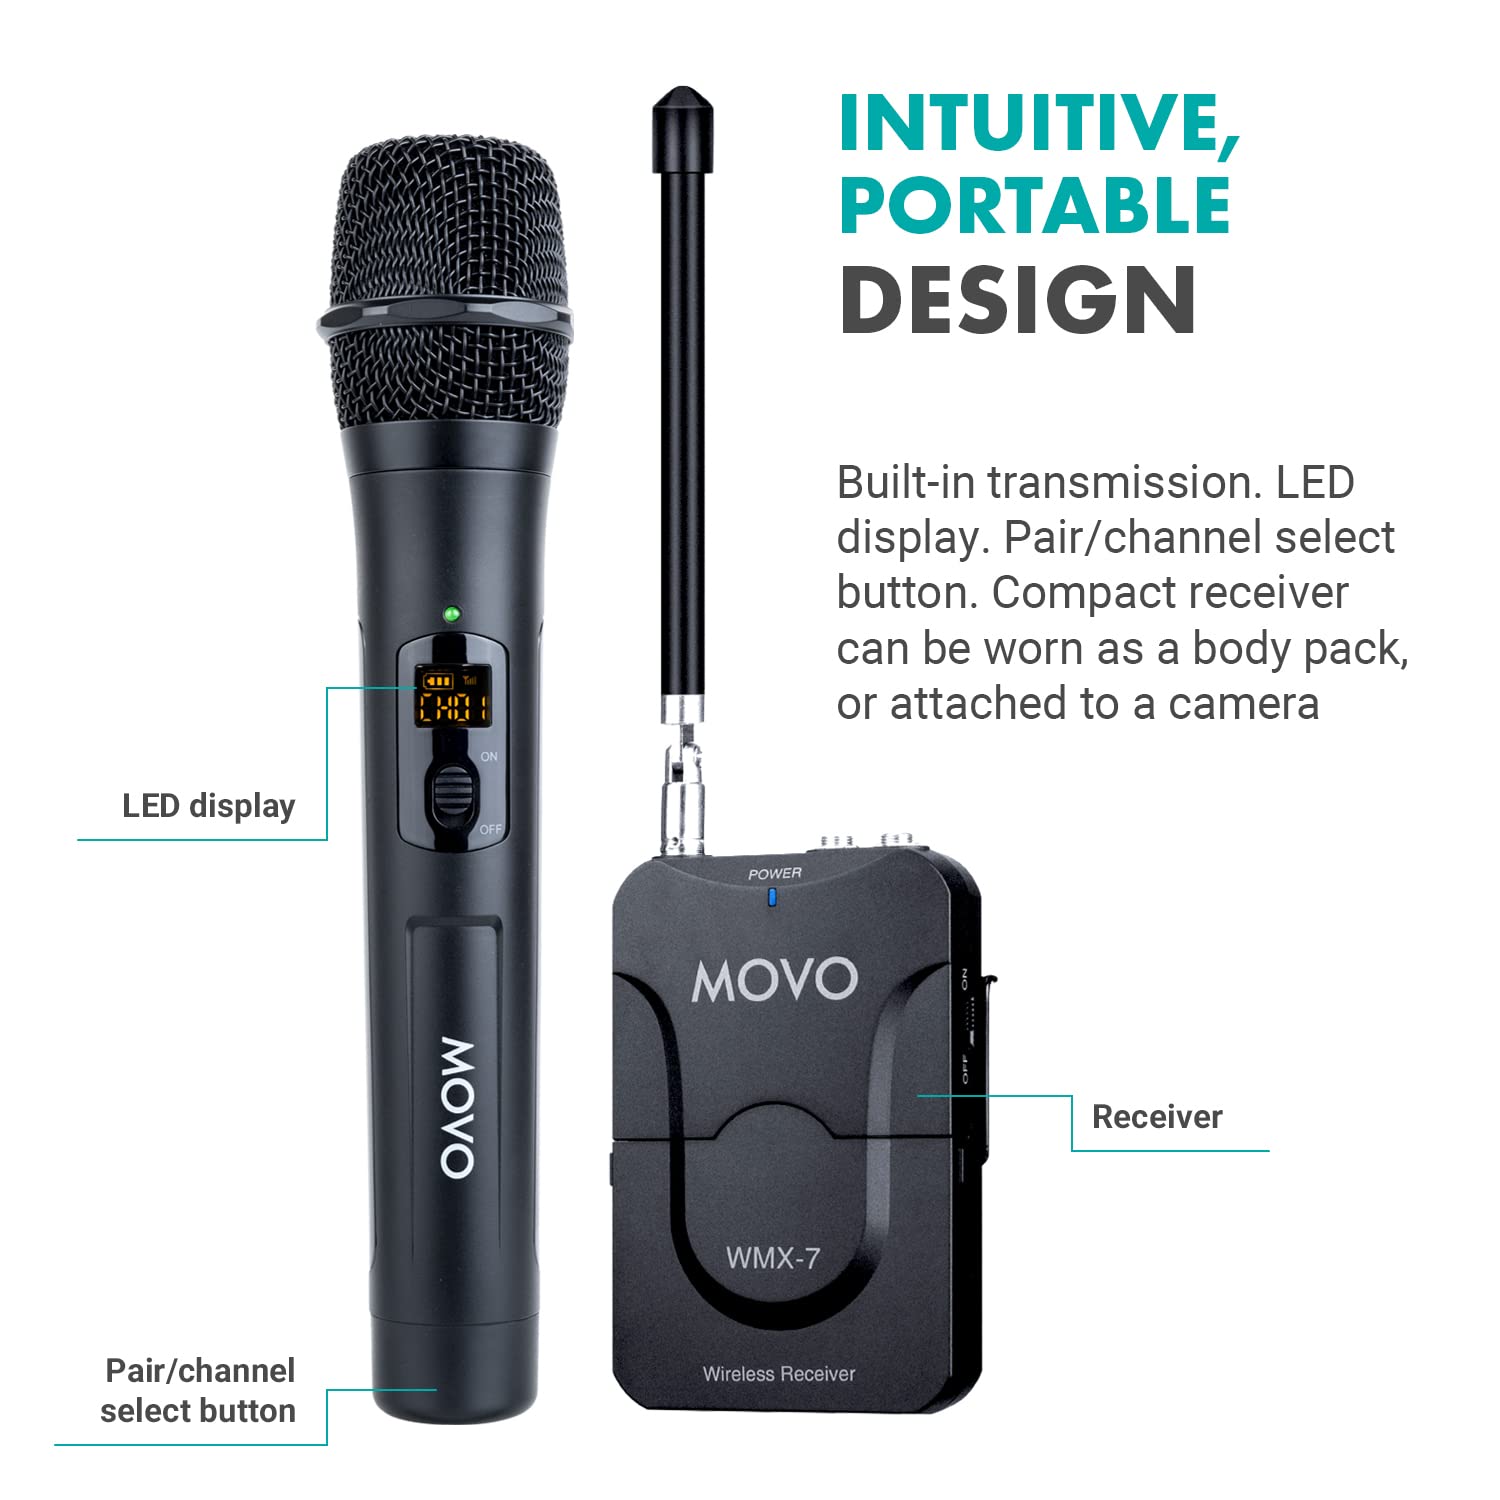 Movo WMX-7-TH+RX Handheld Wireless Microphone System - Omnidirectional Microphone with Built-in VHF Transmitter, Bodypack Receiver - Wireless Mic Interview Kit for Reporters, Vlogging, Live Events  - Like New